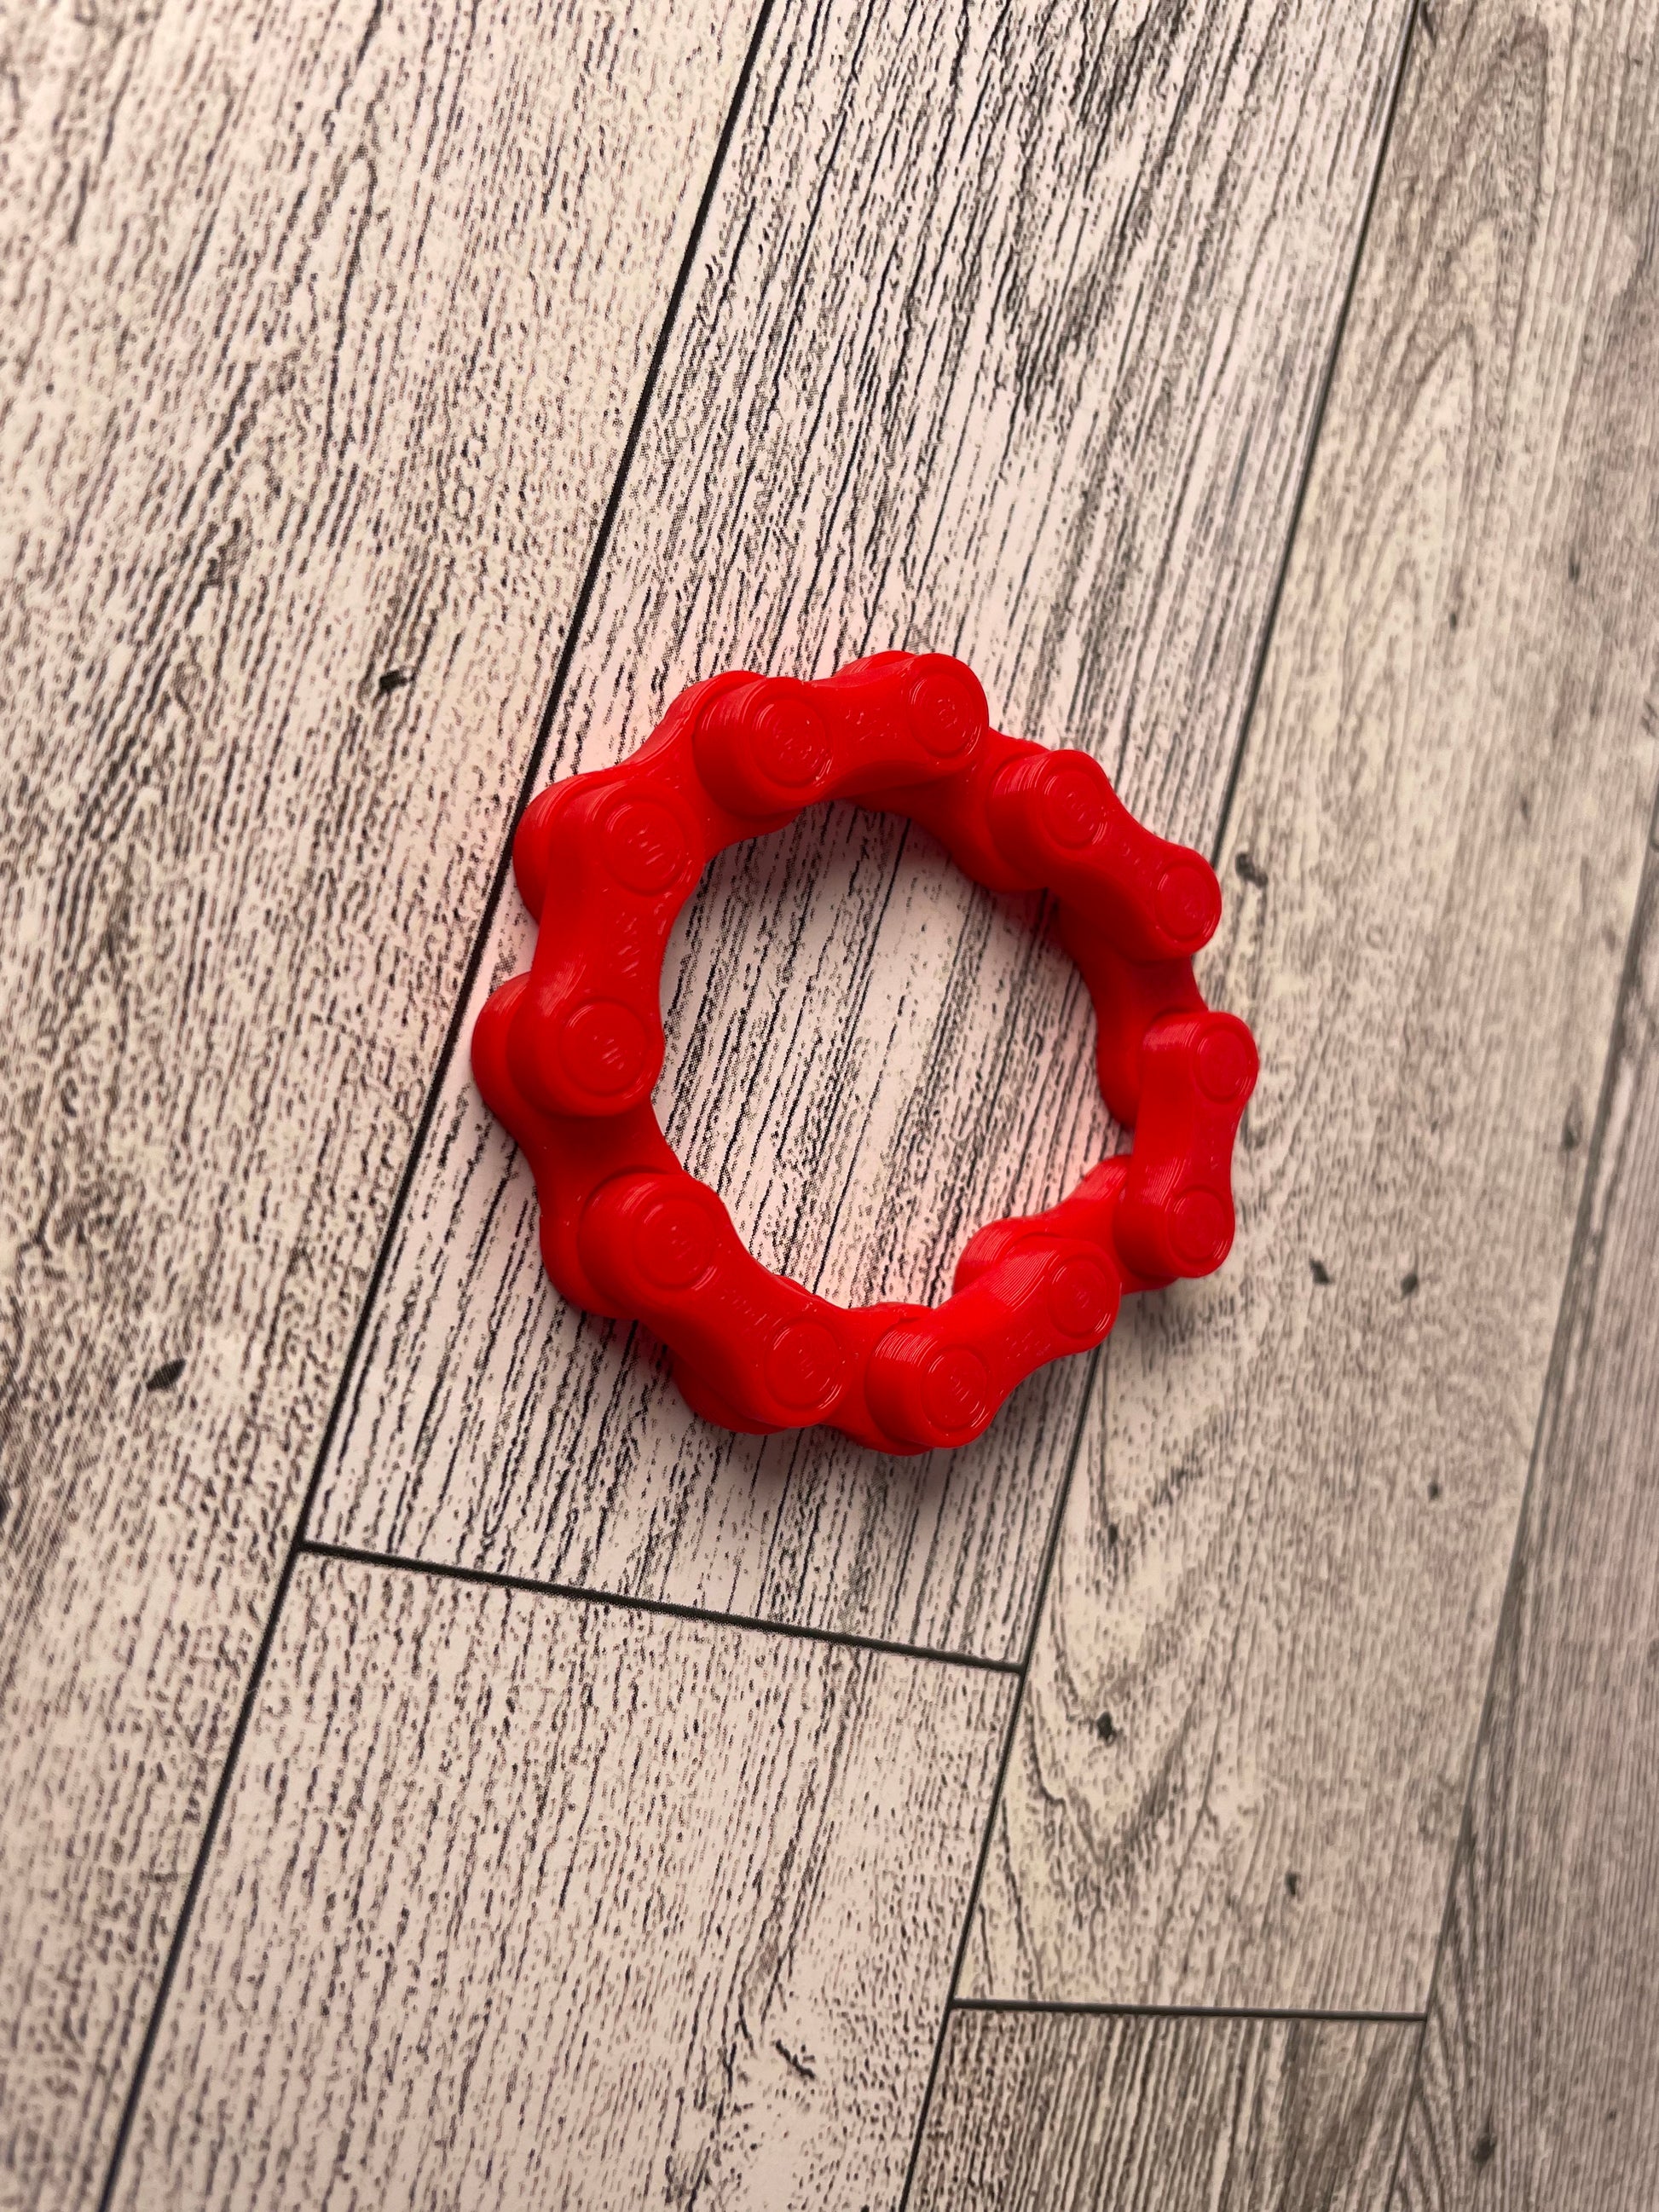 A red chain link on a wood backdrop. The chain is arranged in a circle shape and there are six links.